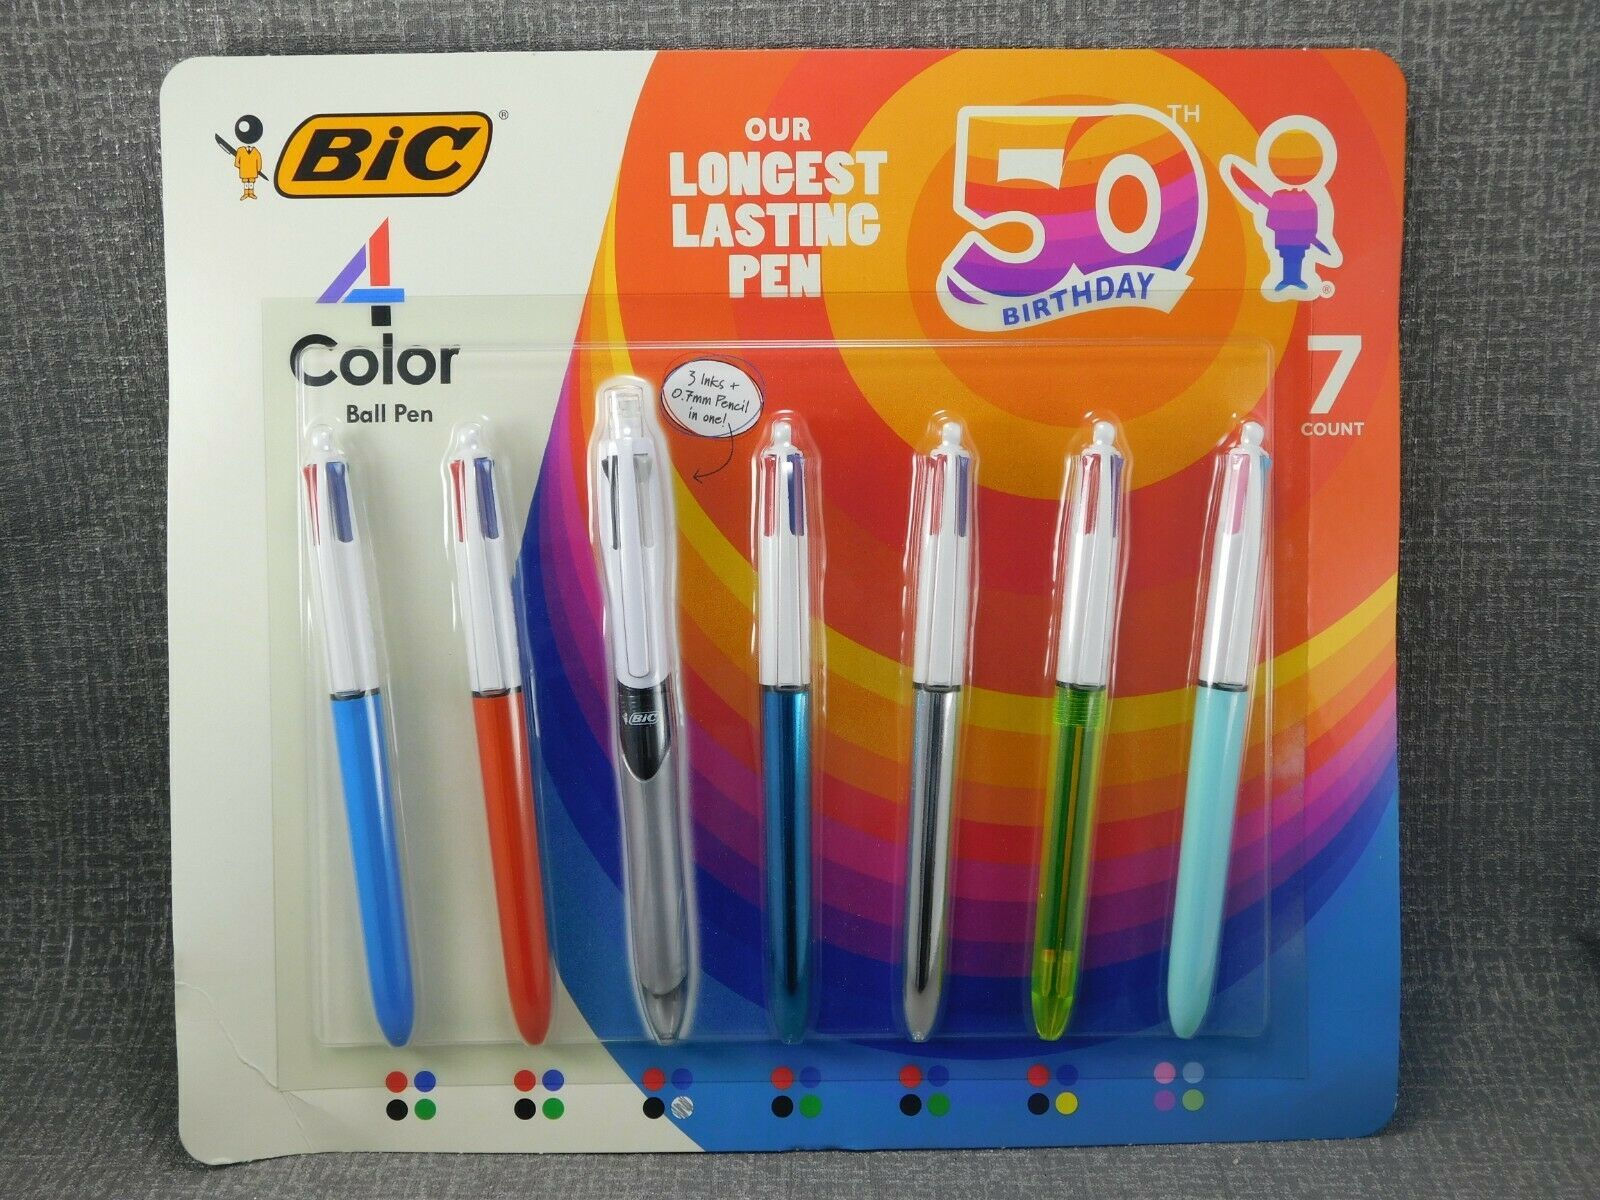 Primary image for BiC 4-Color Ball Pens Fun Colorful Long-Lasting Ink, 7 Count. 50th birthday